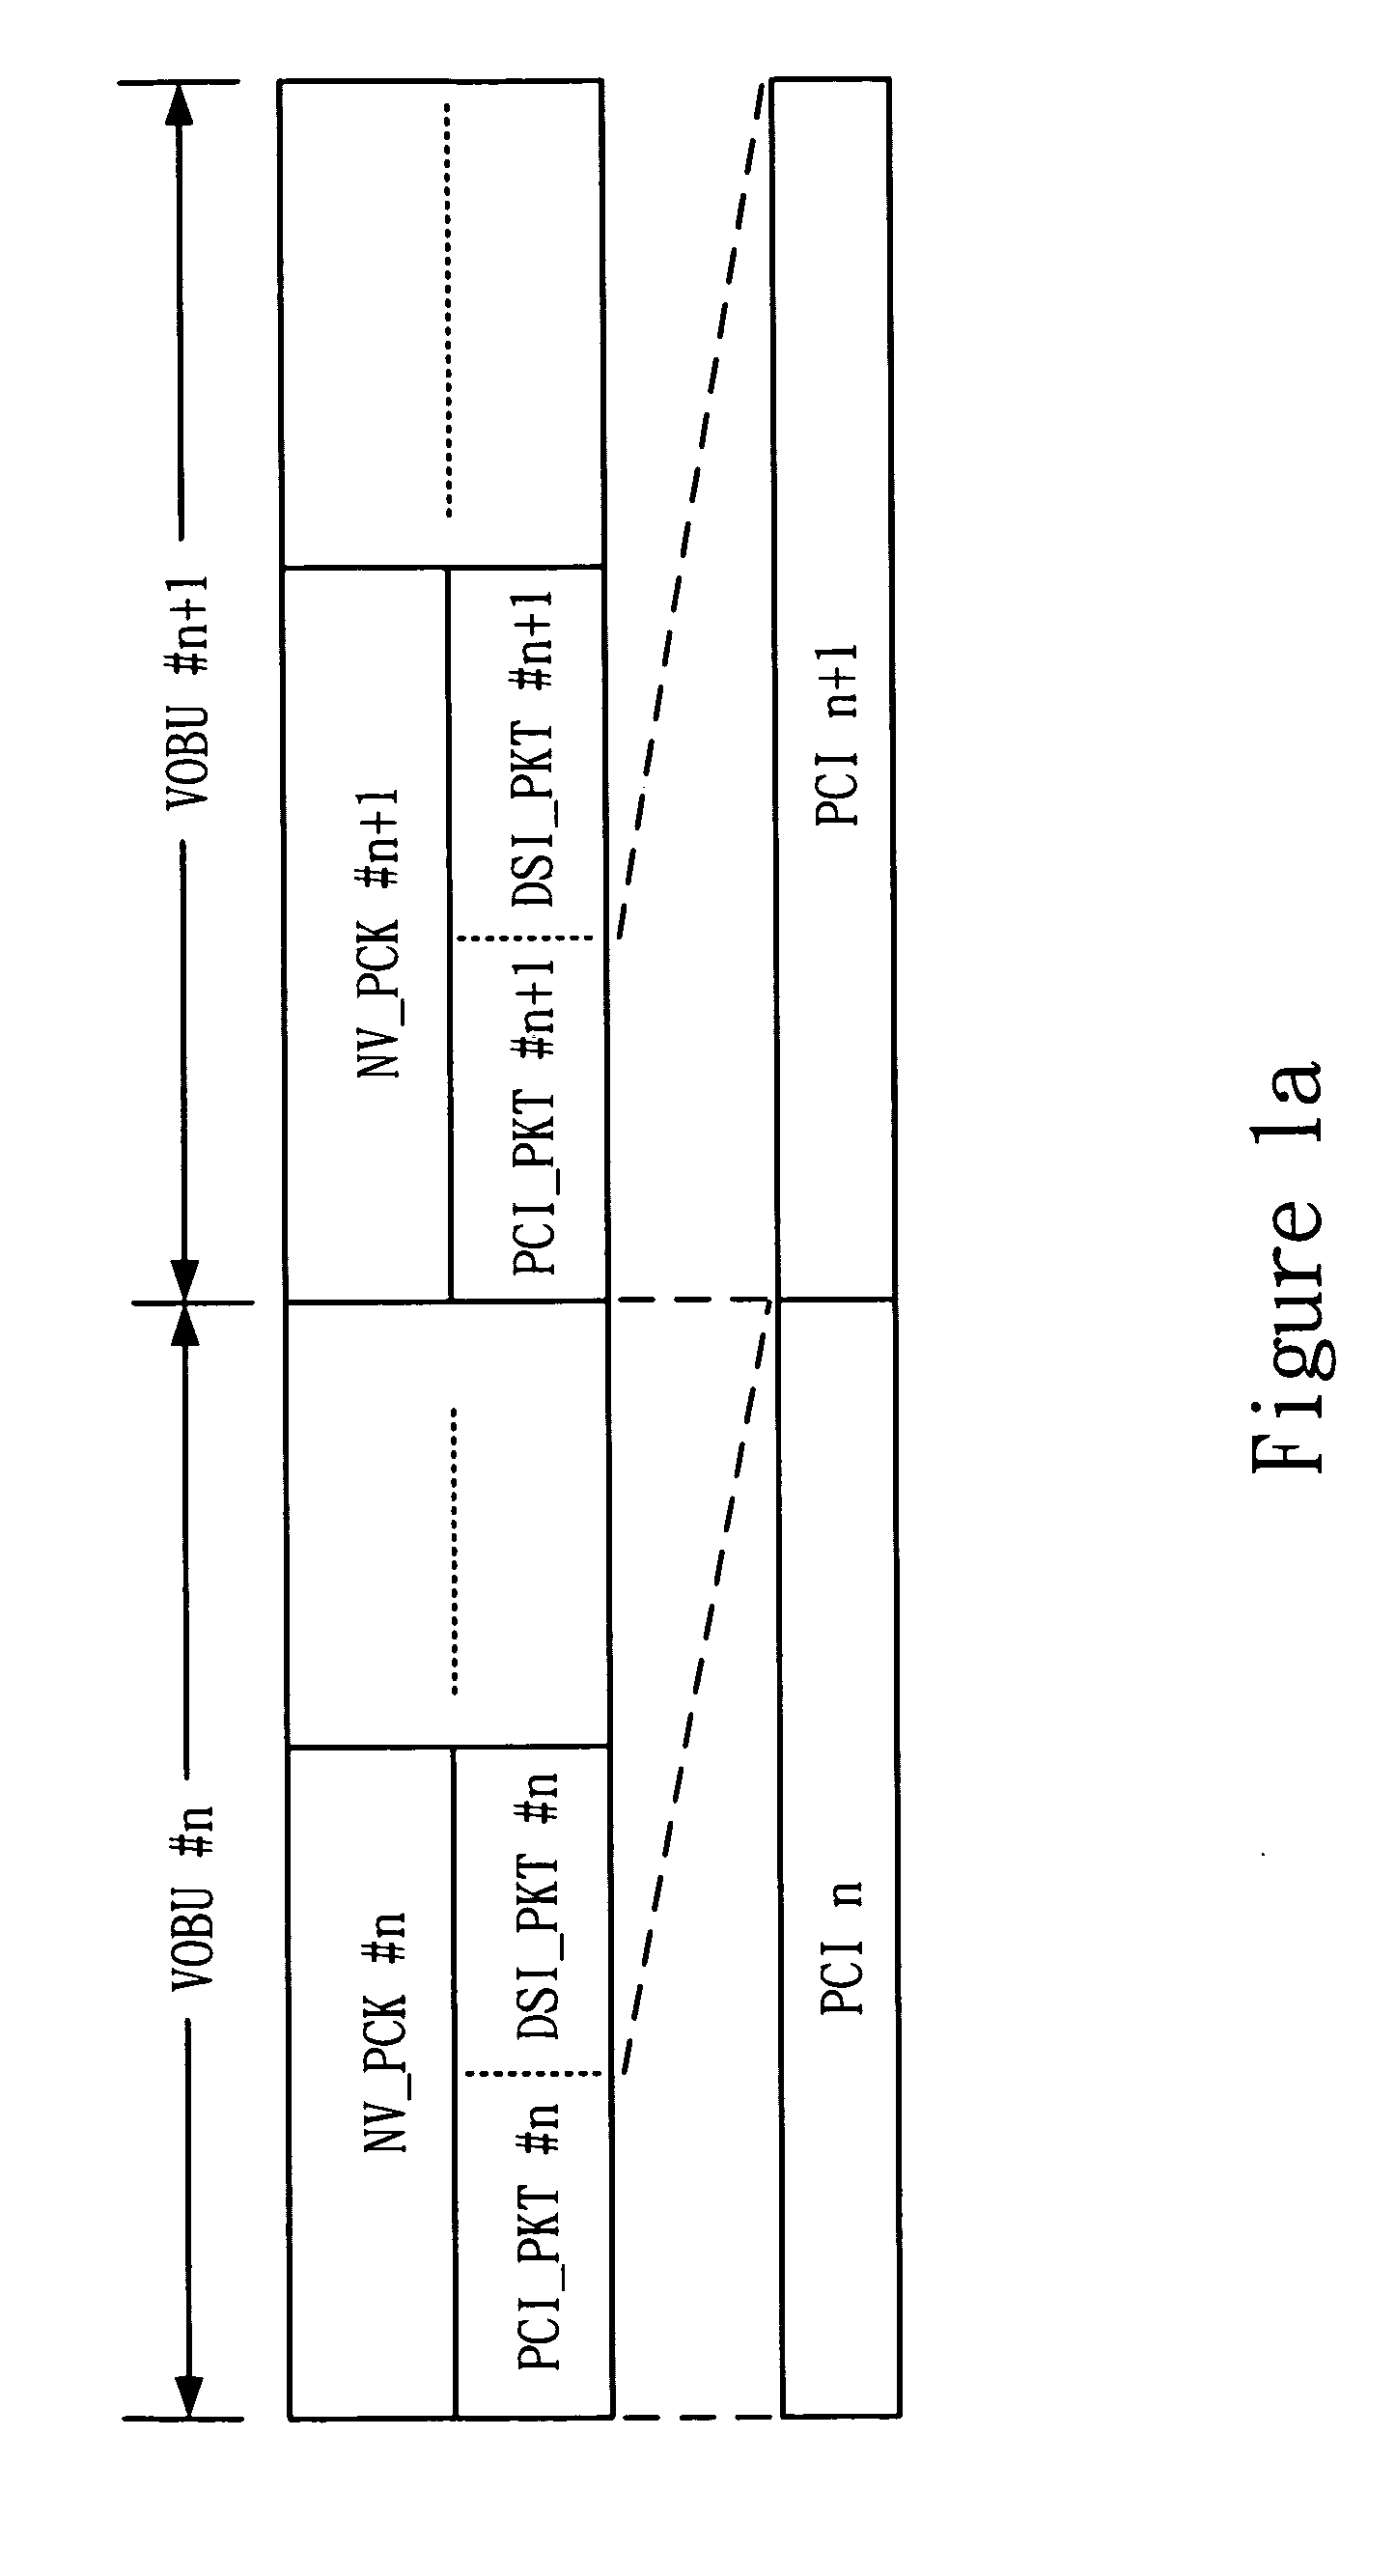 Method for controlling an operating frequency of a processor during playback of a recorded video